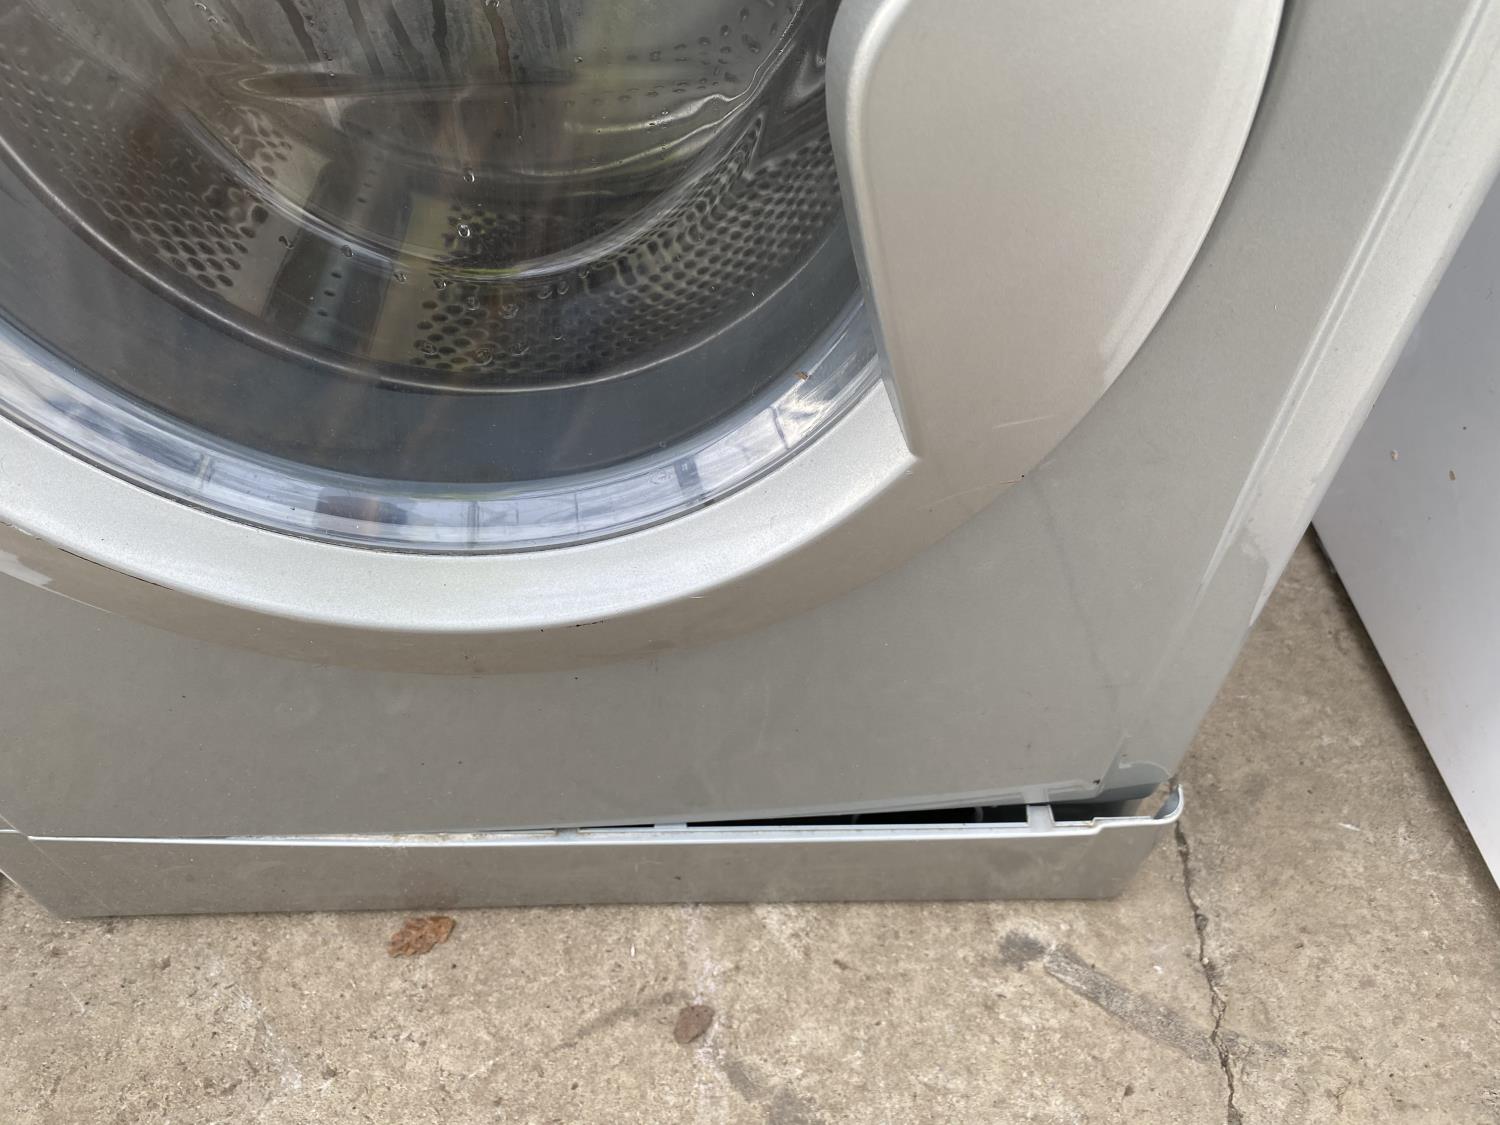 A SILVER INDESIT 7KG WASHING MACHINE BELIEVED IN WORKING ORDER BUT NO WARRANTY - Image 4 of 5